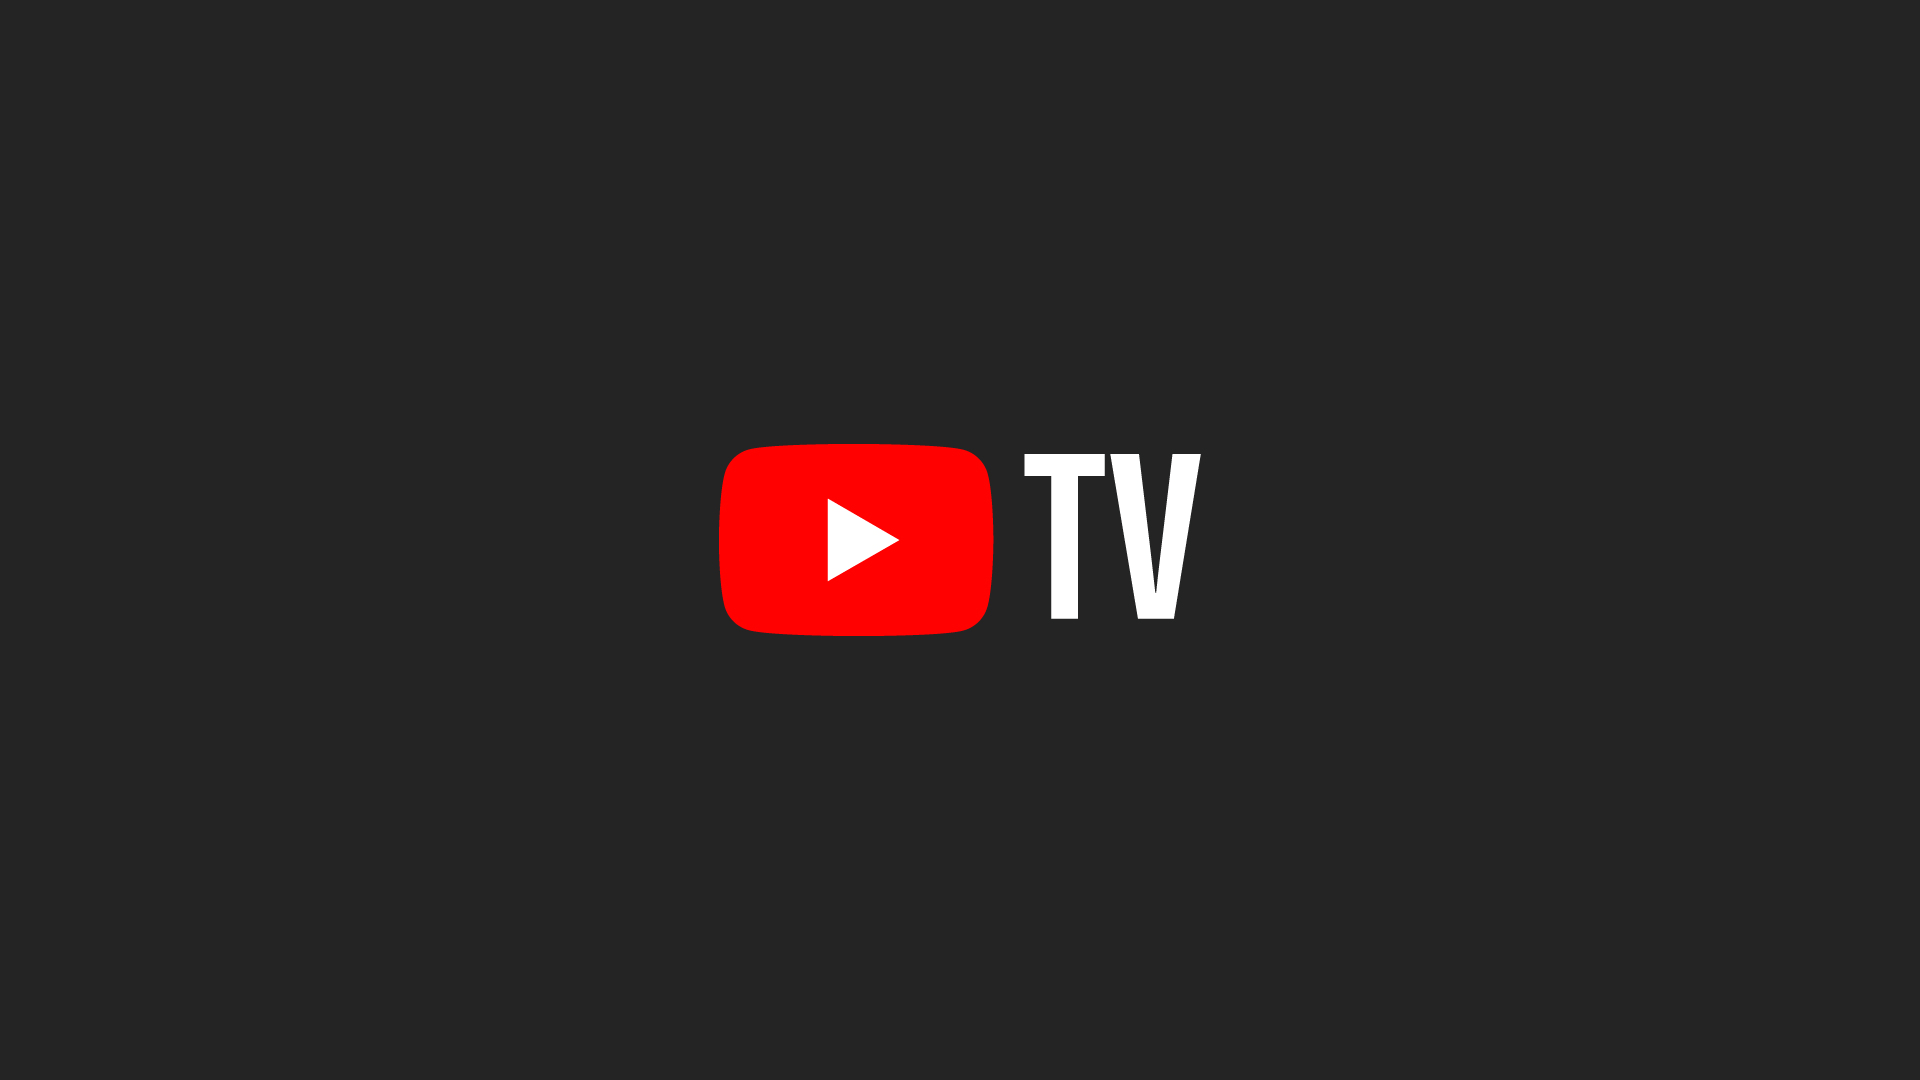 YTFam Now Just Redirects Just YouTube TV Instead of Offering $19.99 Accounts